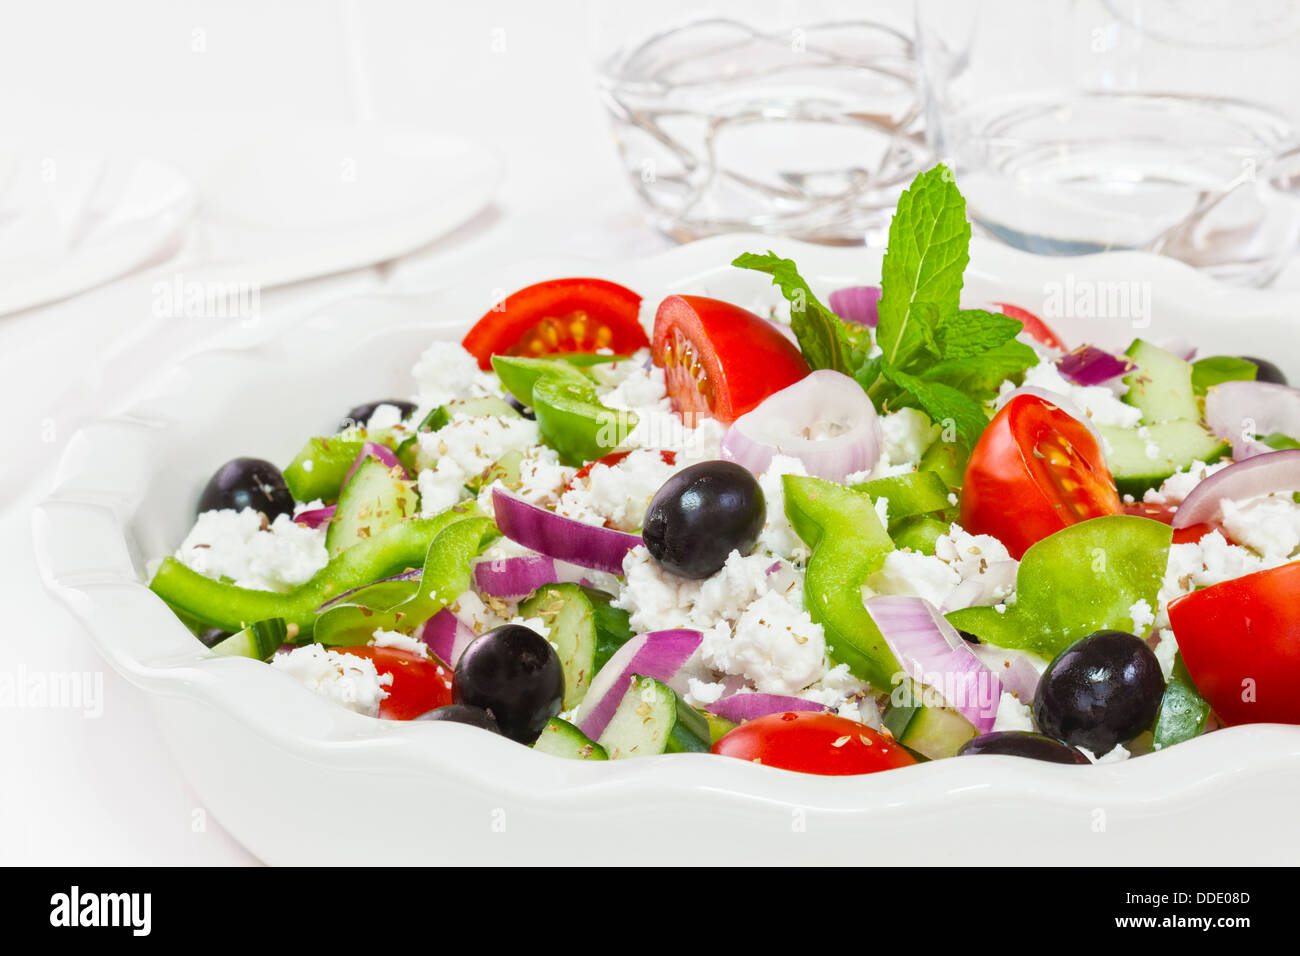 Greek salad, popular salad made from tomatoes, green pepper, cucumber, black olives, mint, oregano and feta cheese. Stock Photo